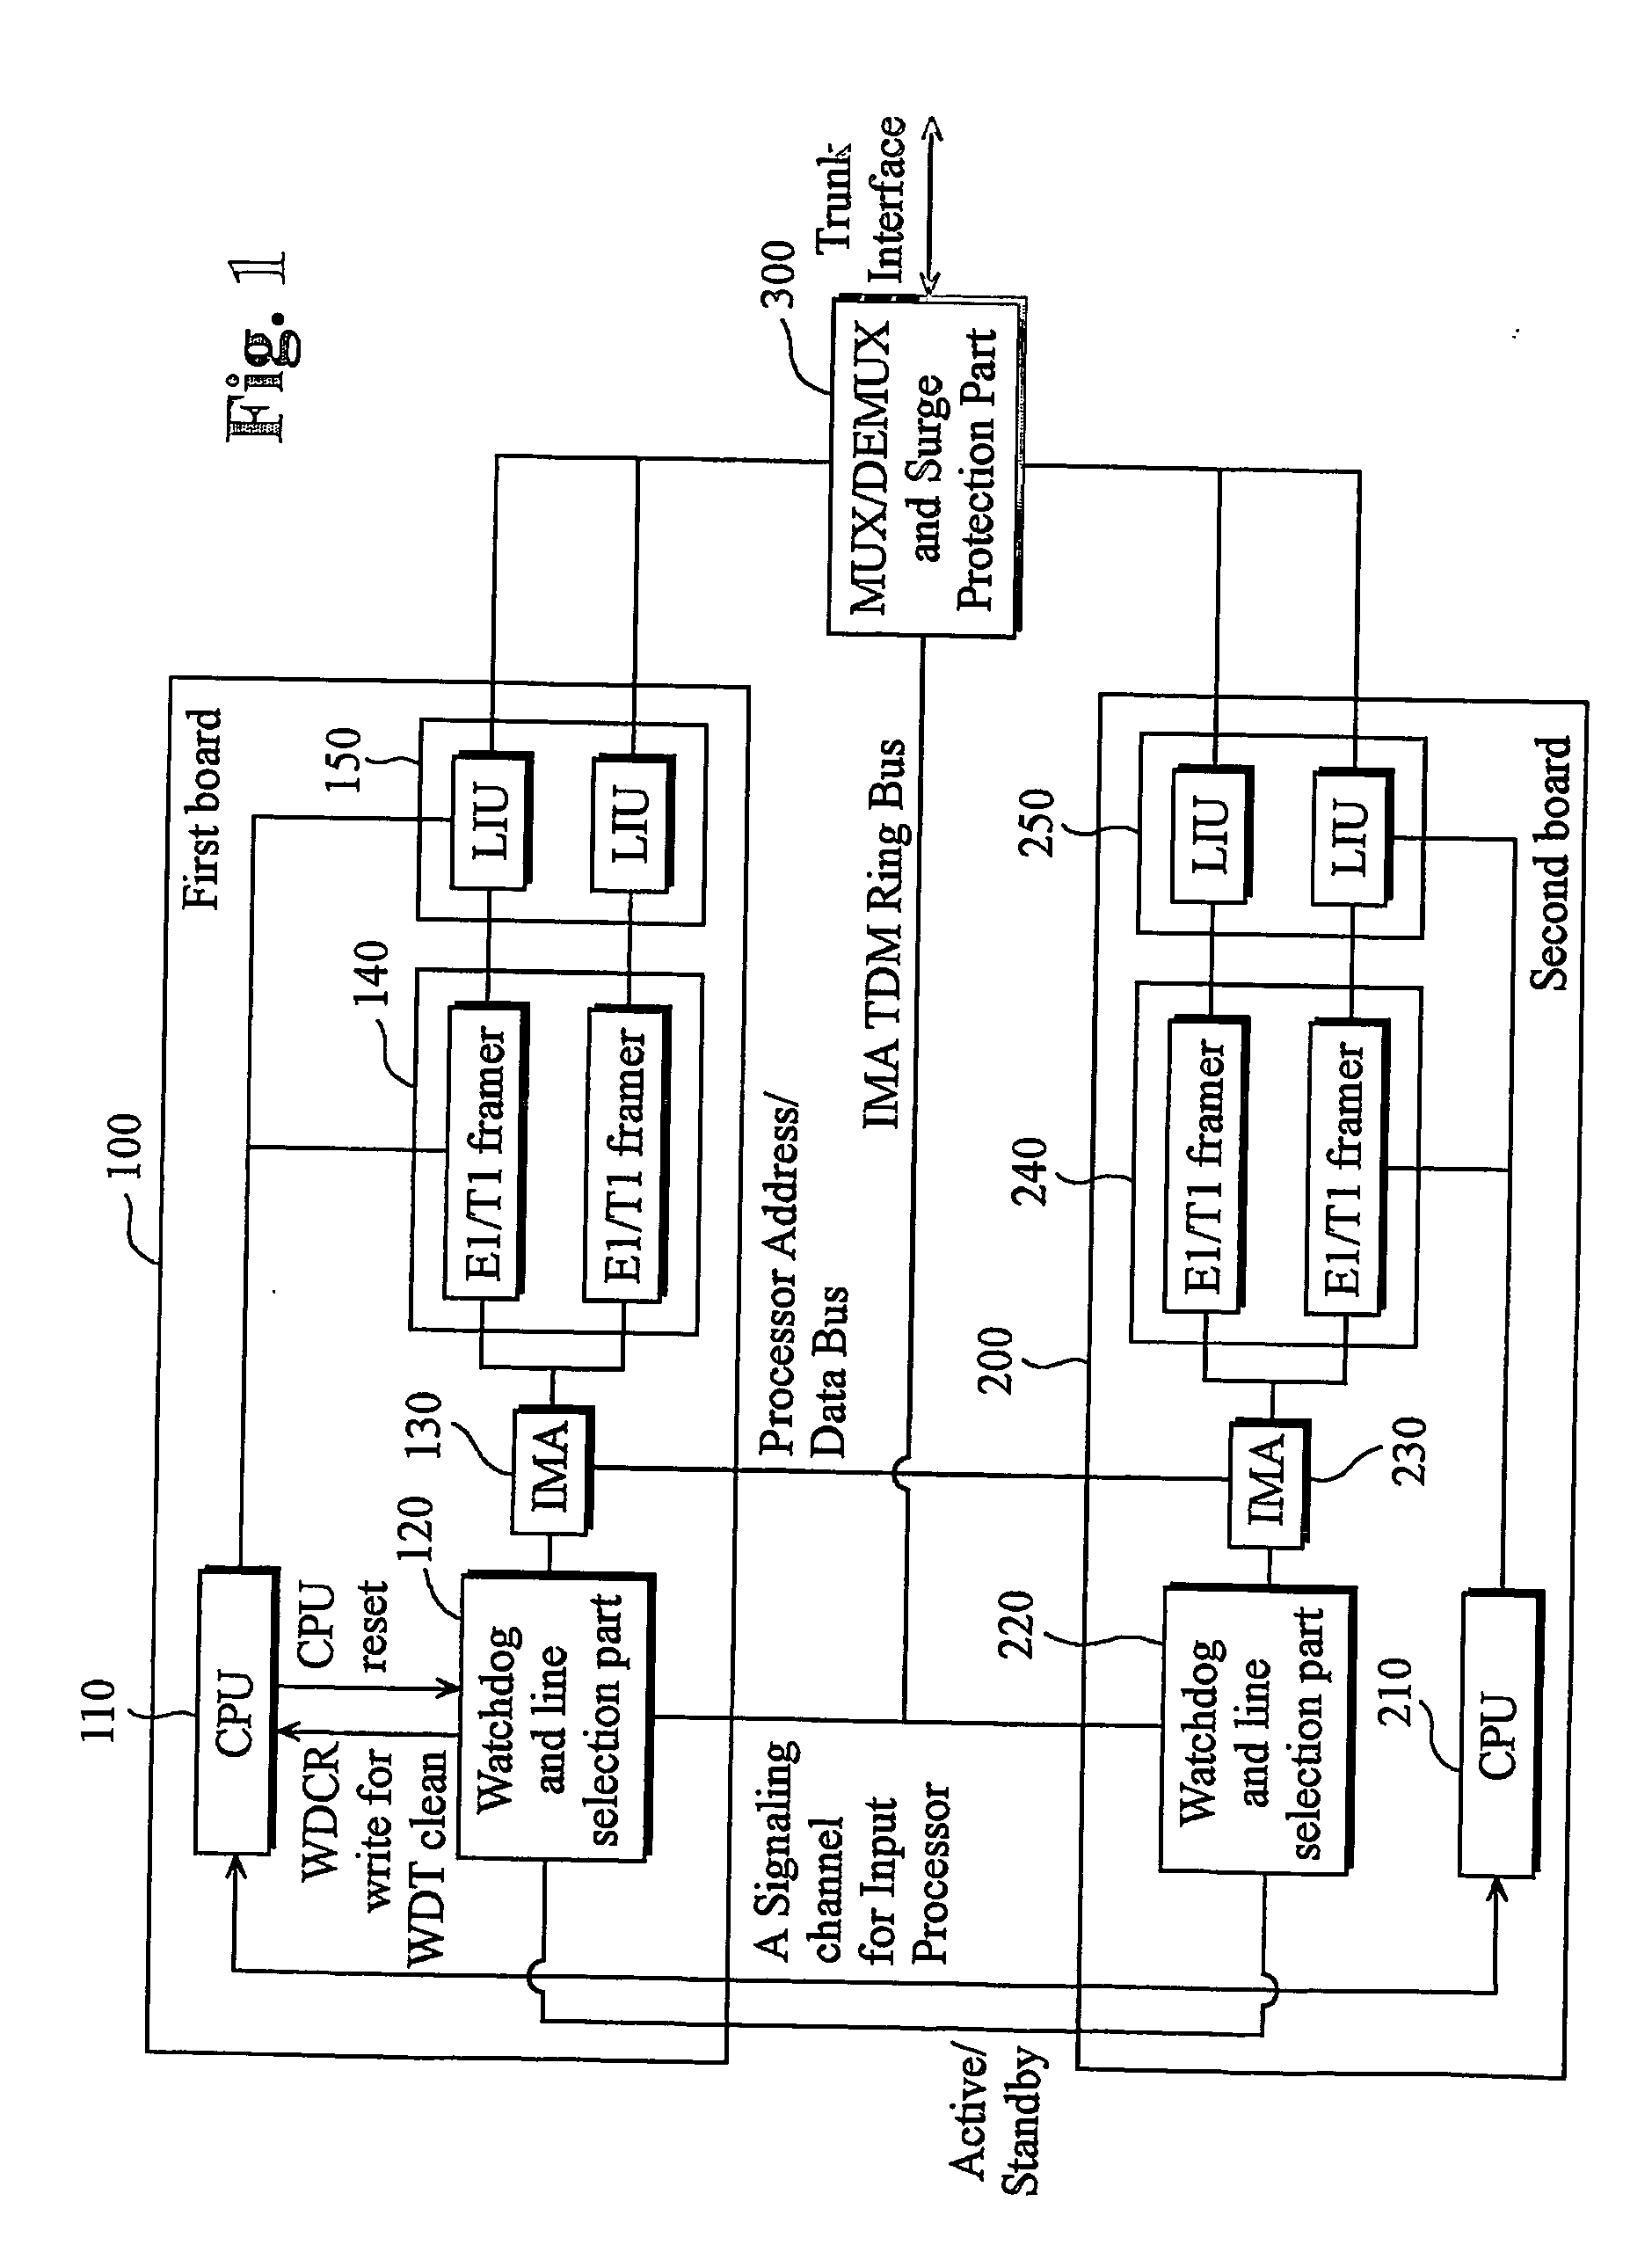 Method for trunk line duplexing protection using a hardware watchdog